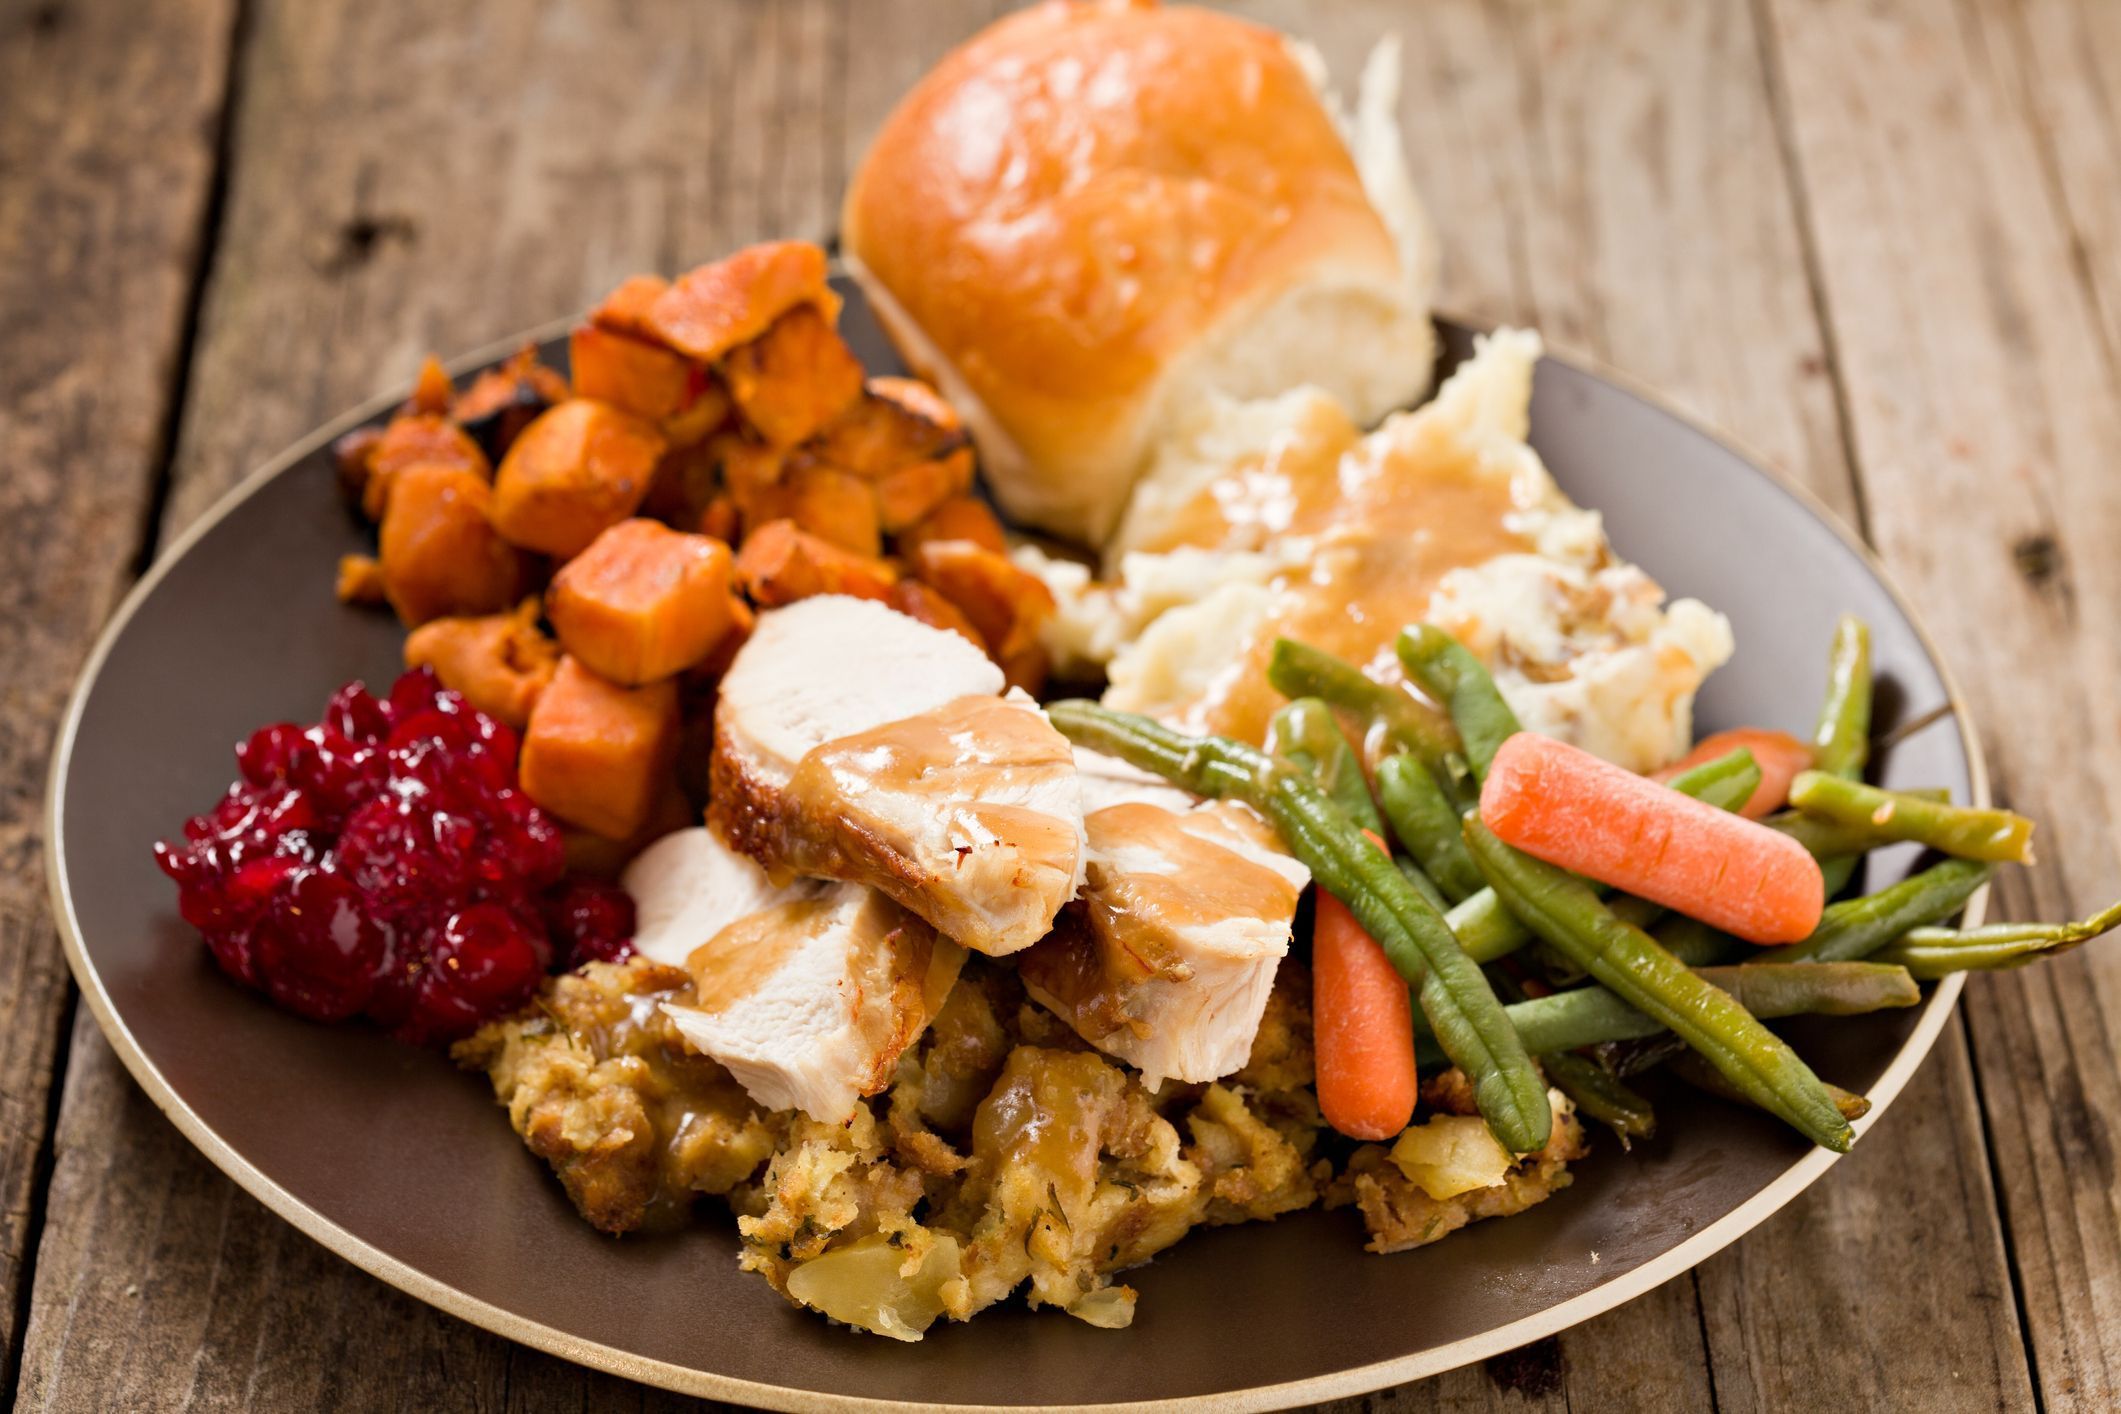 Where to Get Dinner This Thanksgiving - Utah Style and Design